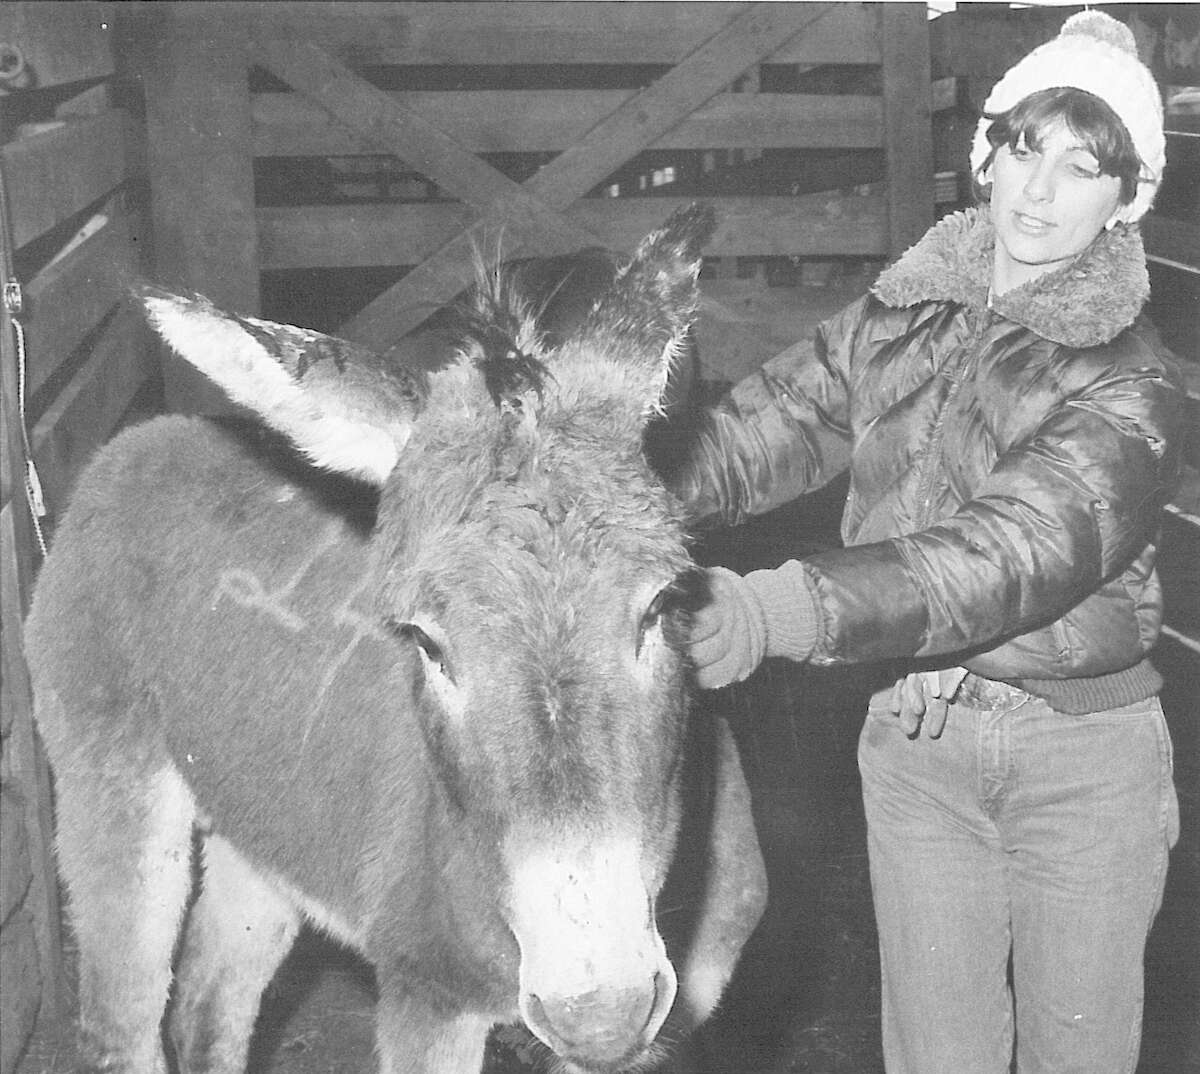 Pamela Biscamp tries gently to get this uncooperative burro to move along without going in the opposite direction. Photo published March 1982